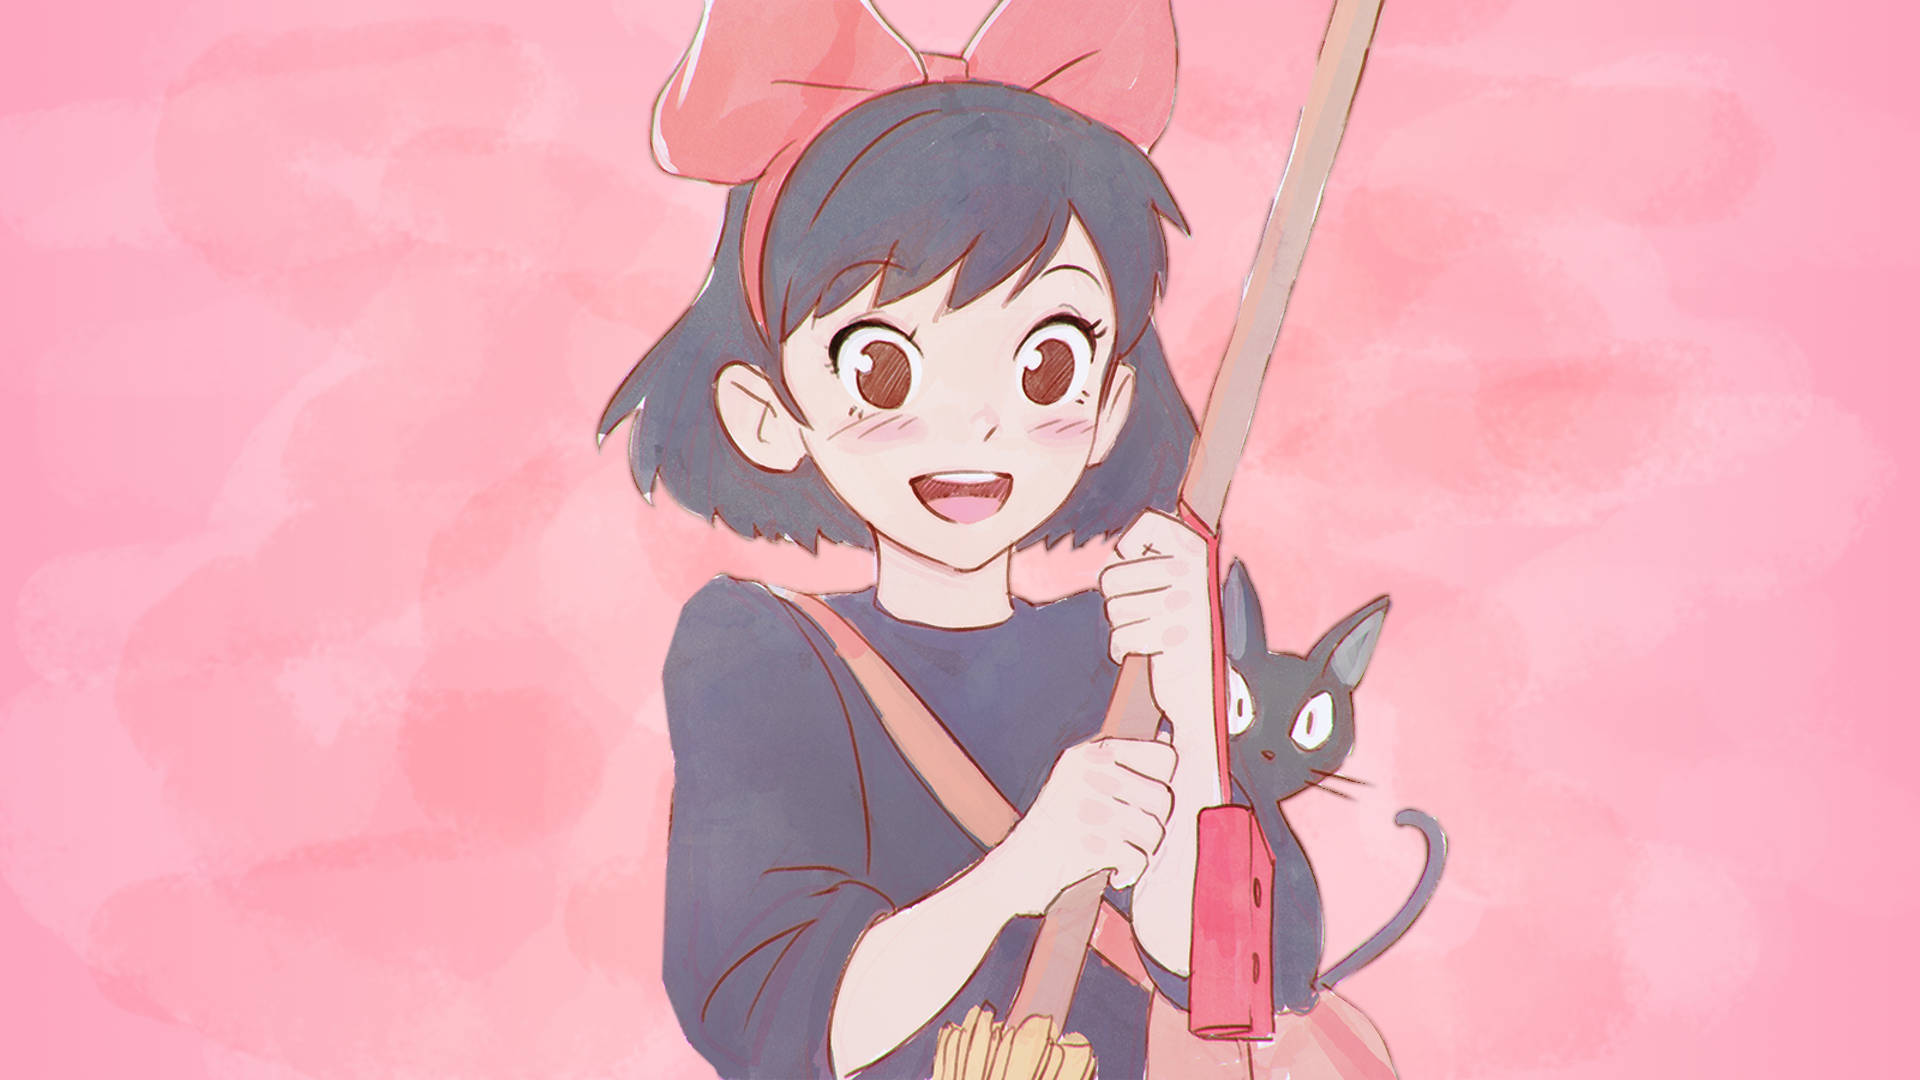 1920x1080  1920x1080 computer wallpaper for kikis delivery service   Coolwallpapersme